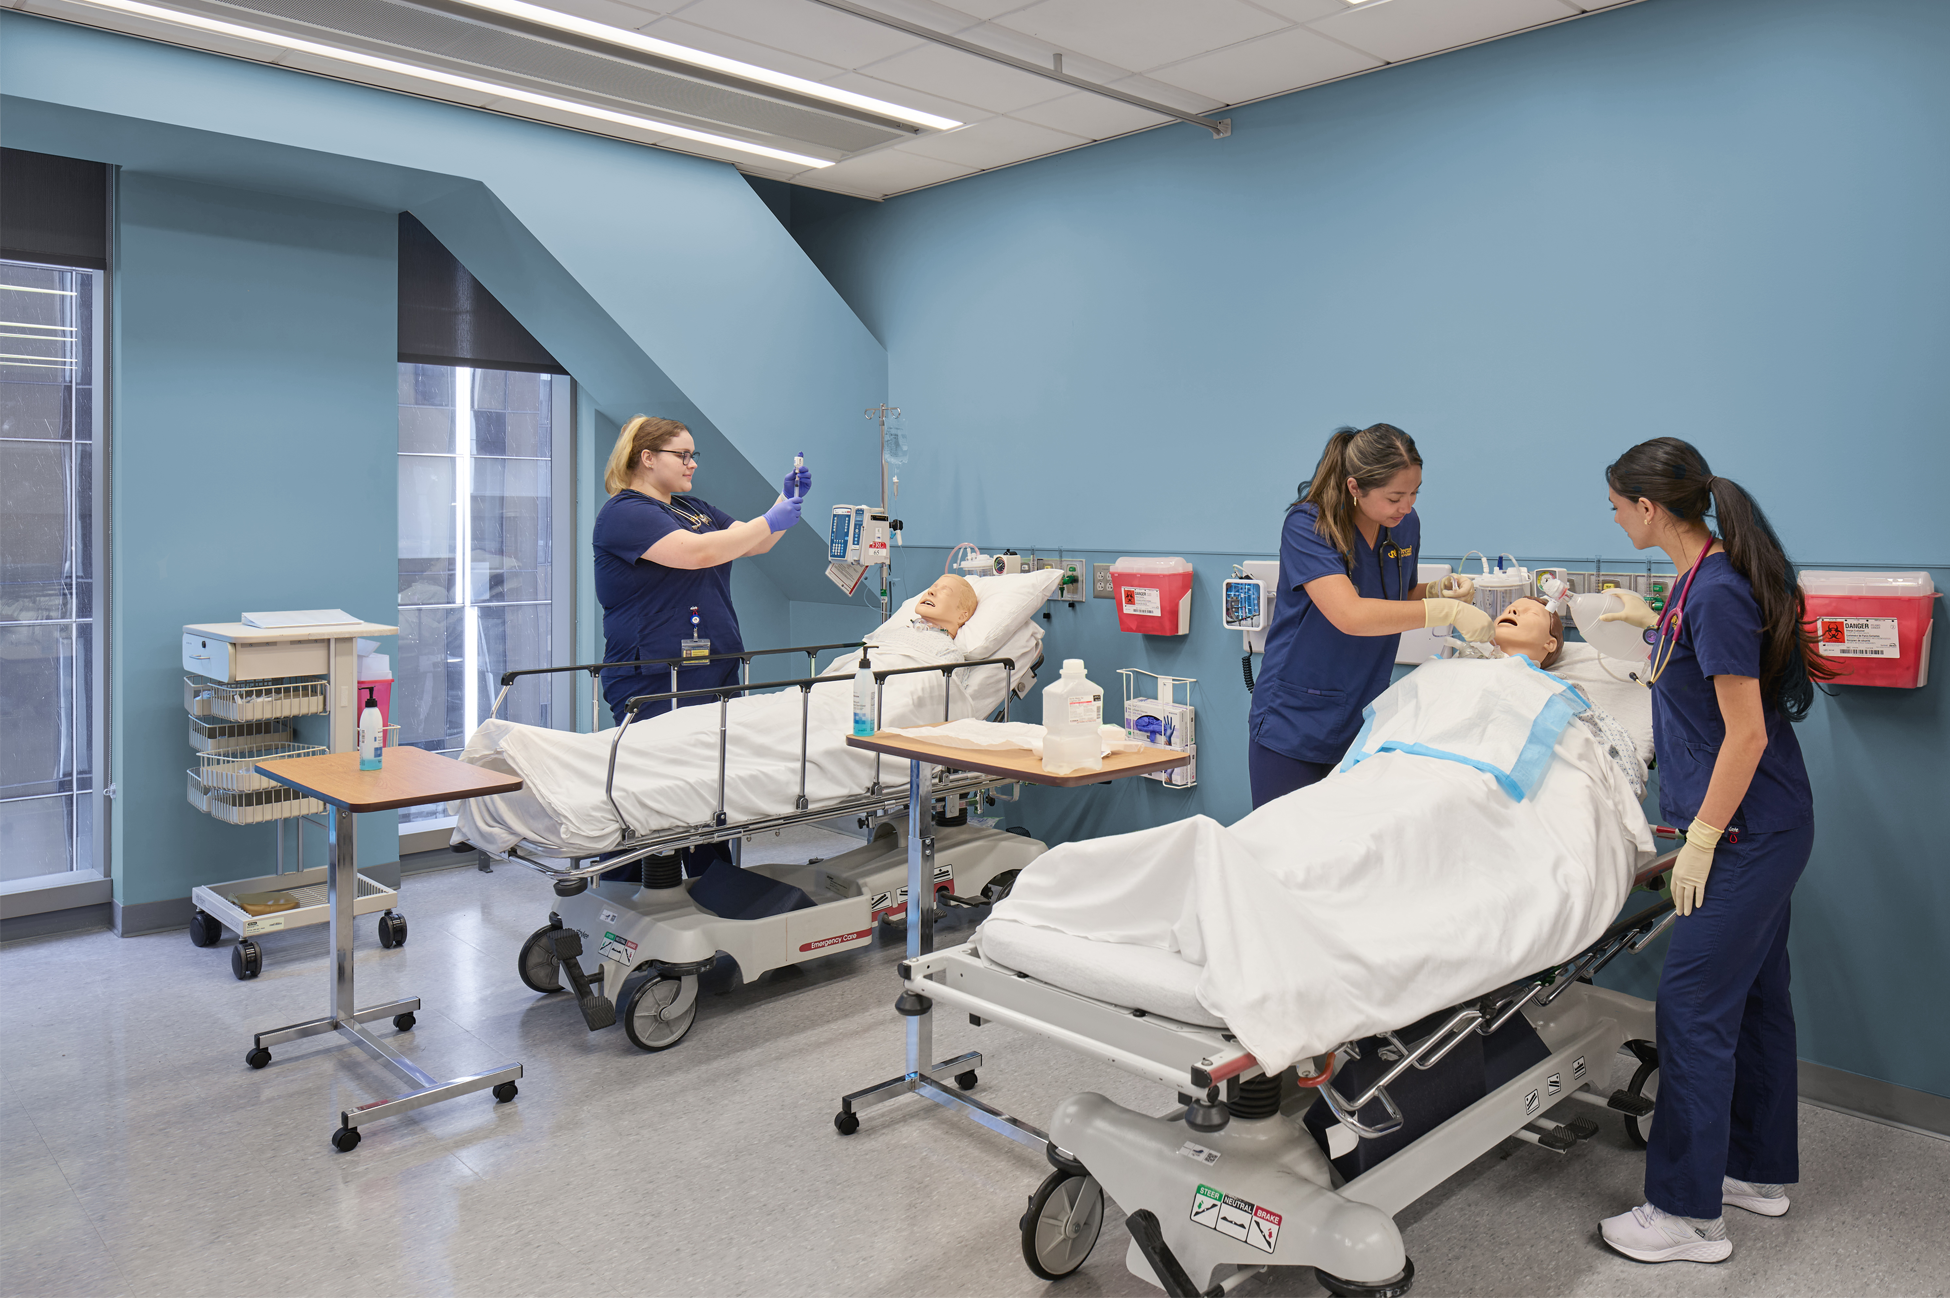 students practice on manikins in hospital beds